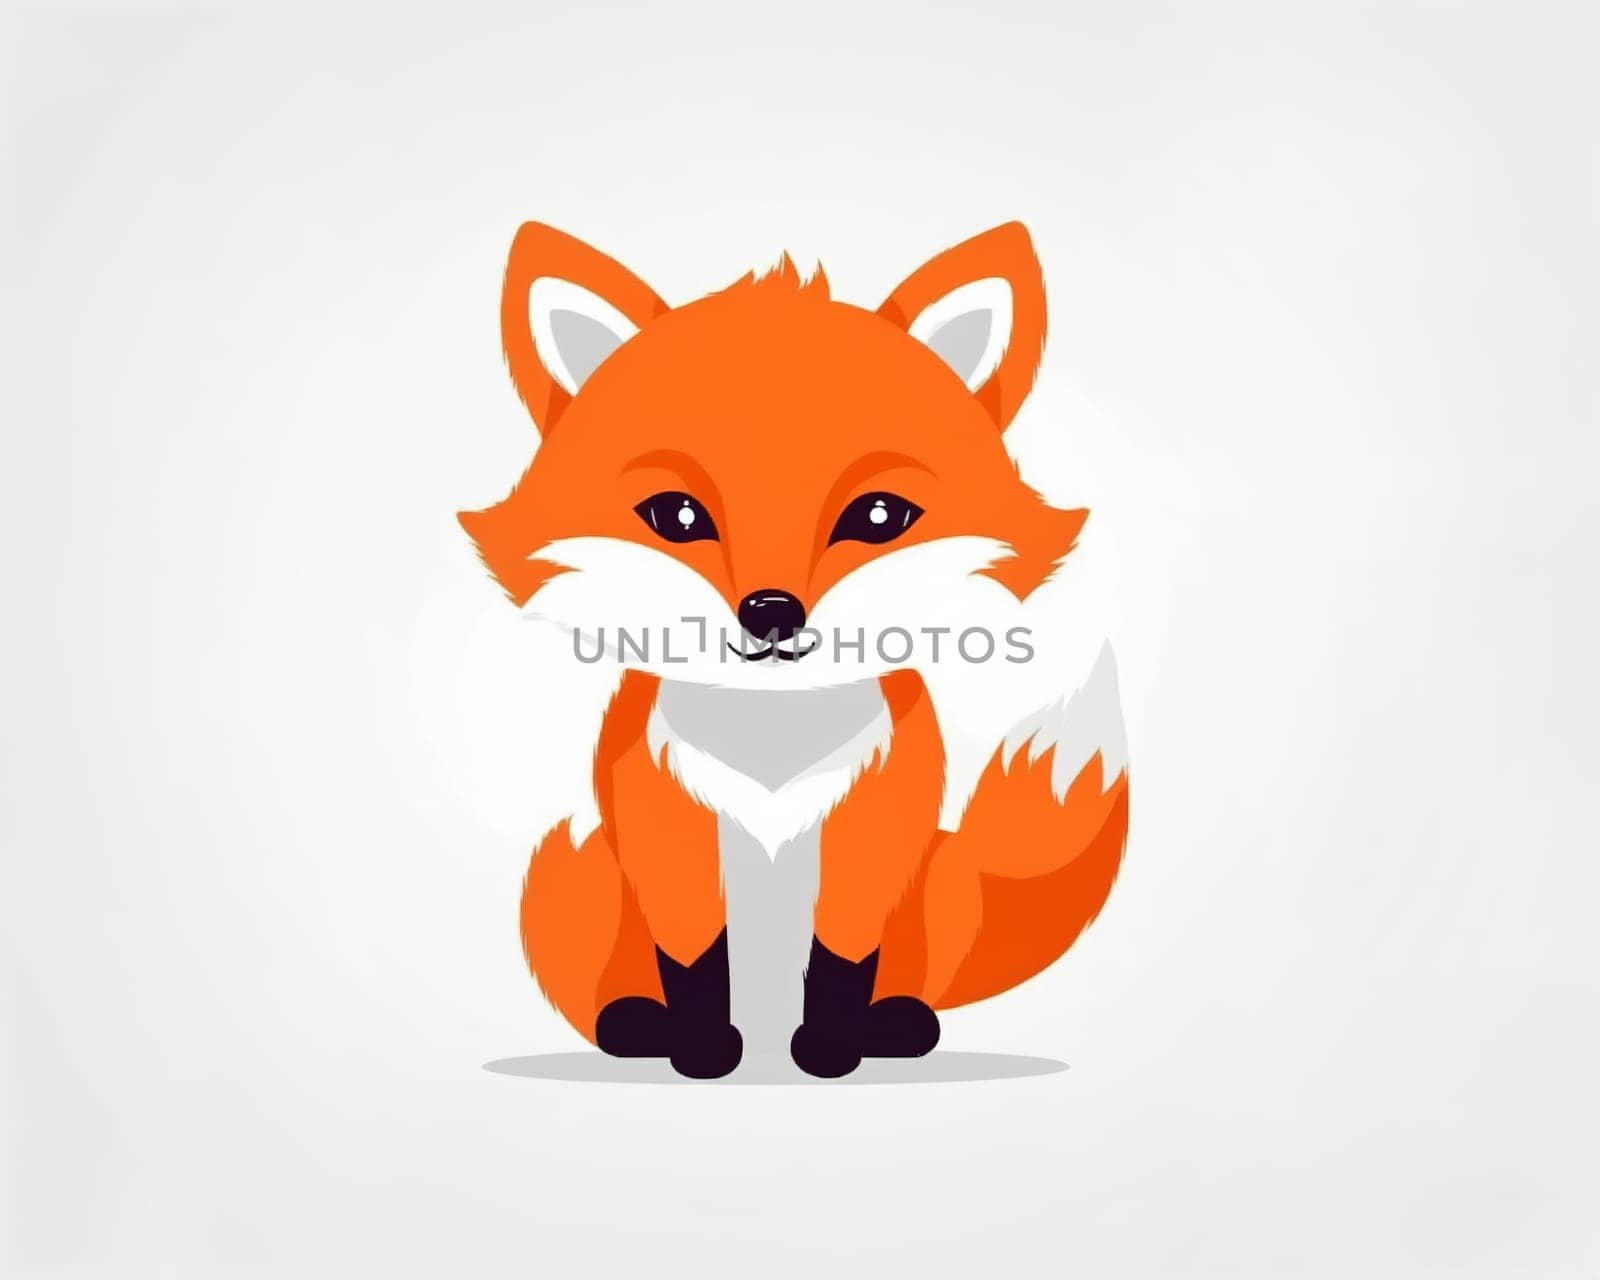 cute little fox icon on a white background. flat illustration.